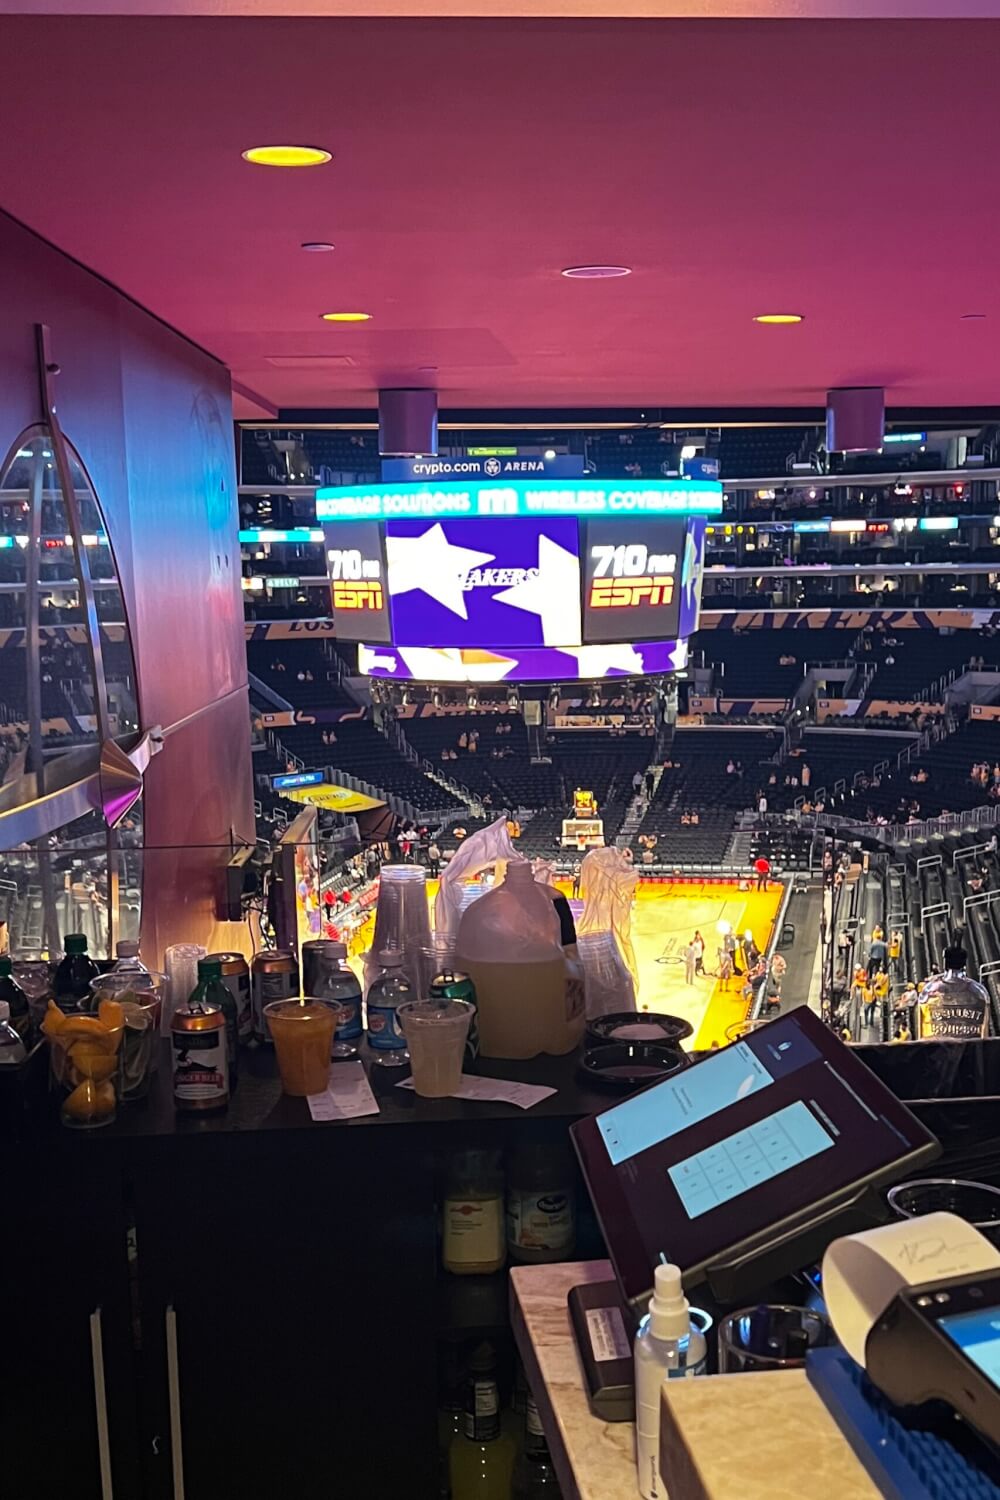 How to Access the Centurion Suite at  Arena (Formerly Staples  Center)